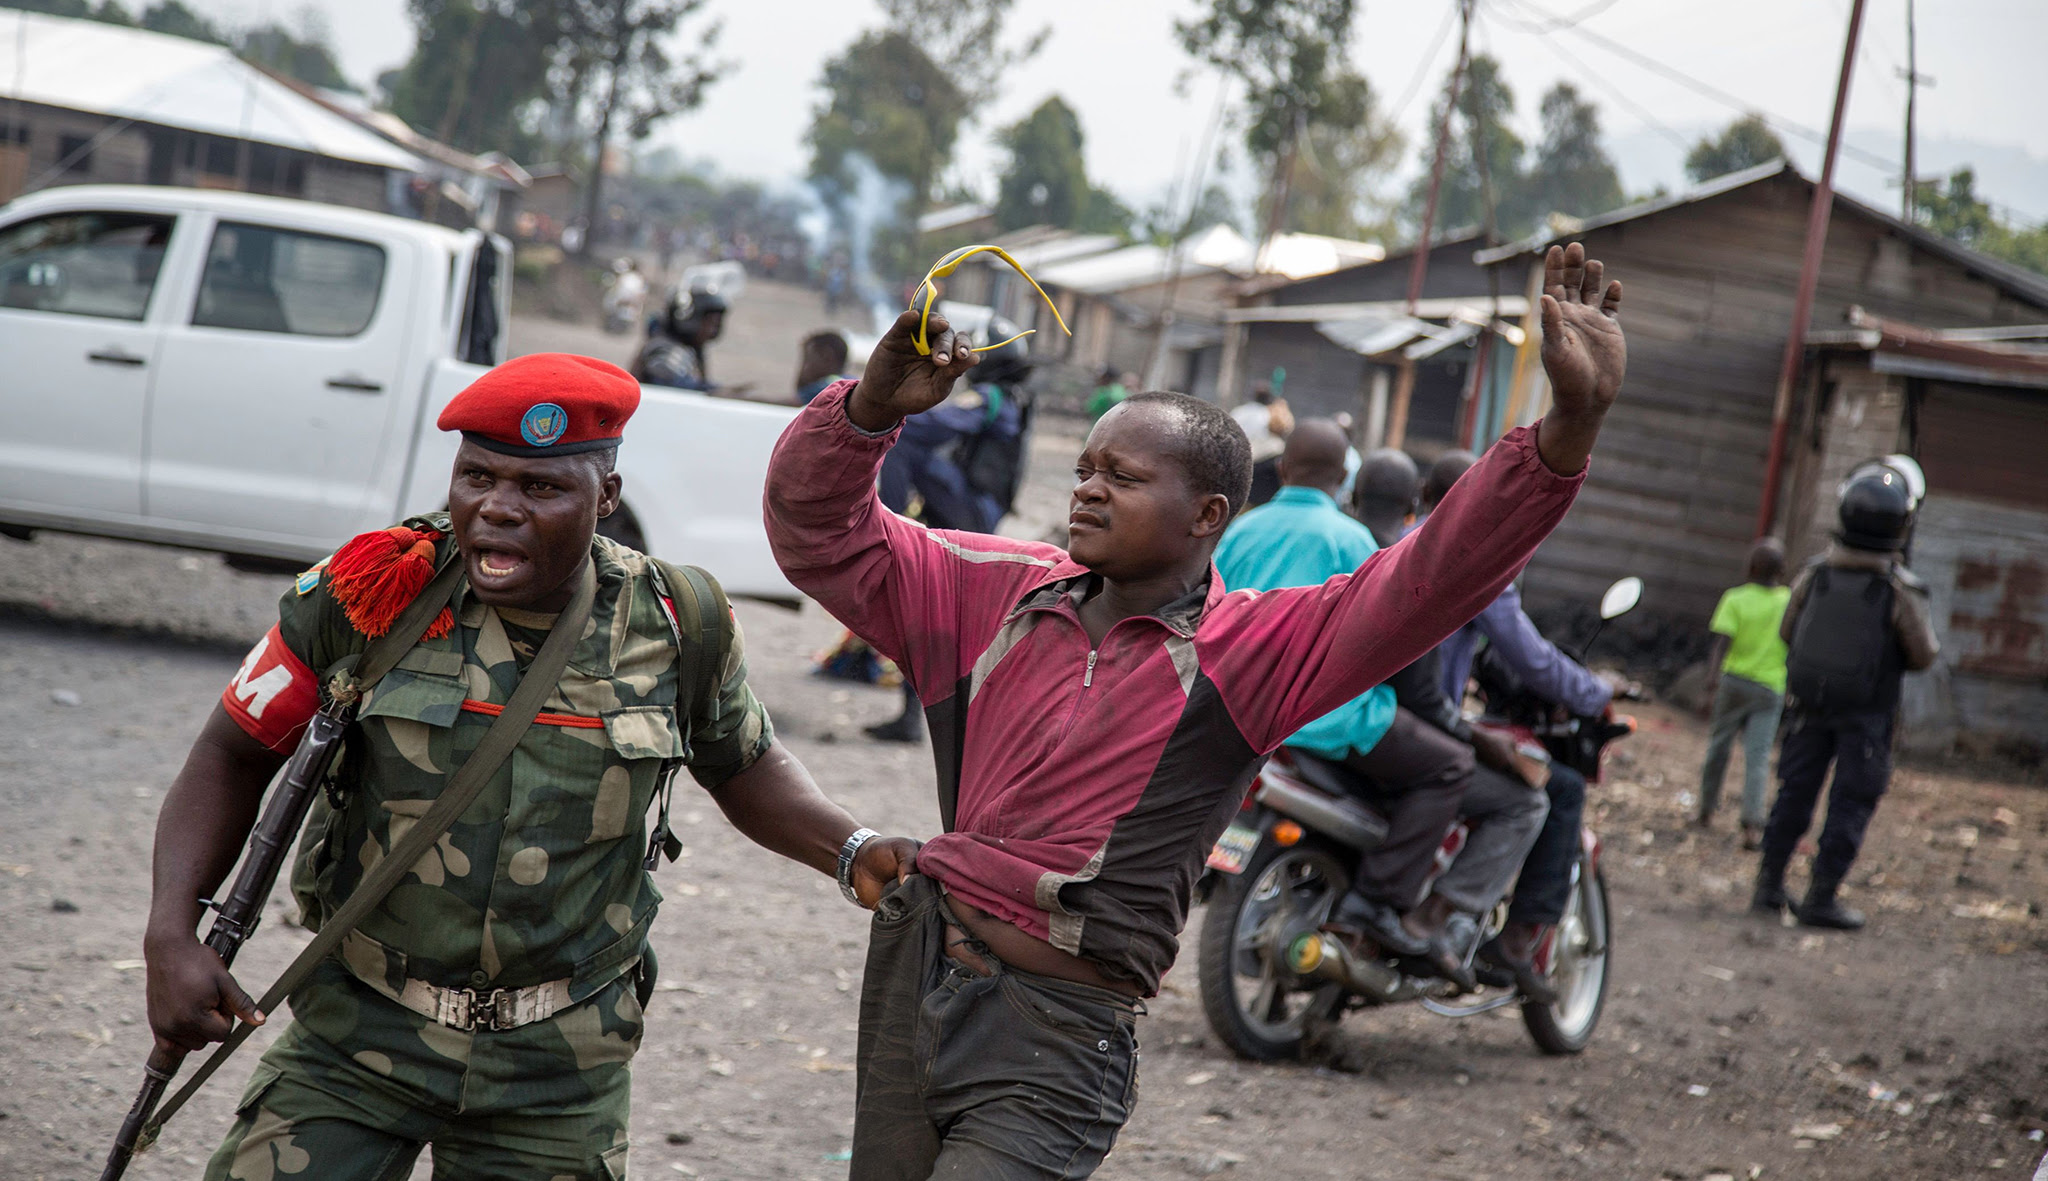 A man is arrested by a member of the military police after people attempted to block the road with rocks,  in the neighbourhood of Majengo in Goma, eastern Democratic Republic of the Congo, on 19 December, 2016, as tensions rose with one day left of Congolese President Joseph Kabila's mandate. Kabila's second term ends on December 20 but he has shown no sign of stepping down and mediation talks have failed, sparking fears of fresh political violence in the mineral-rich but unstable Democratic Republic of Congo. / AFP PHOTO / Griff TapperGRIFF TAPPER/AFP/Getty Images